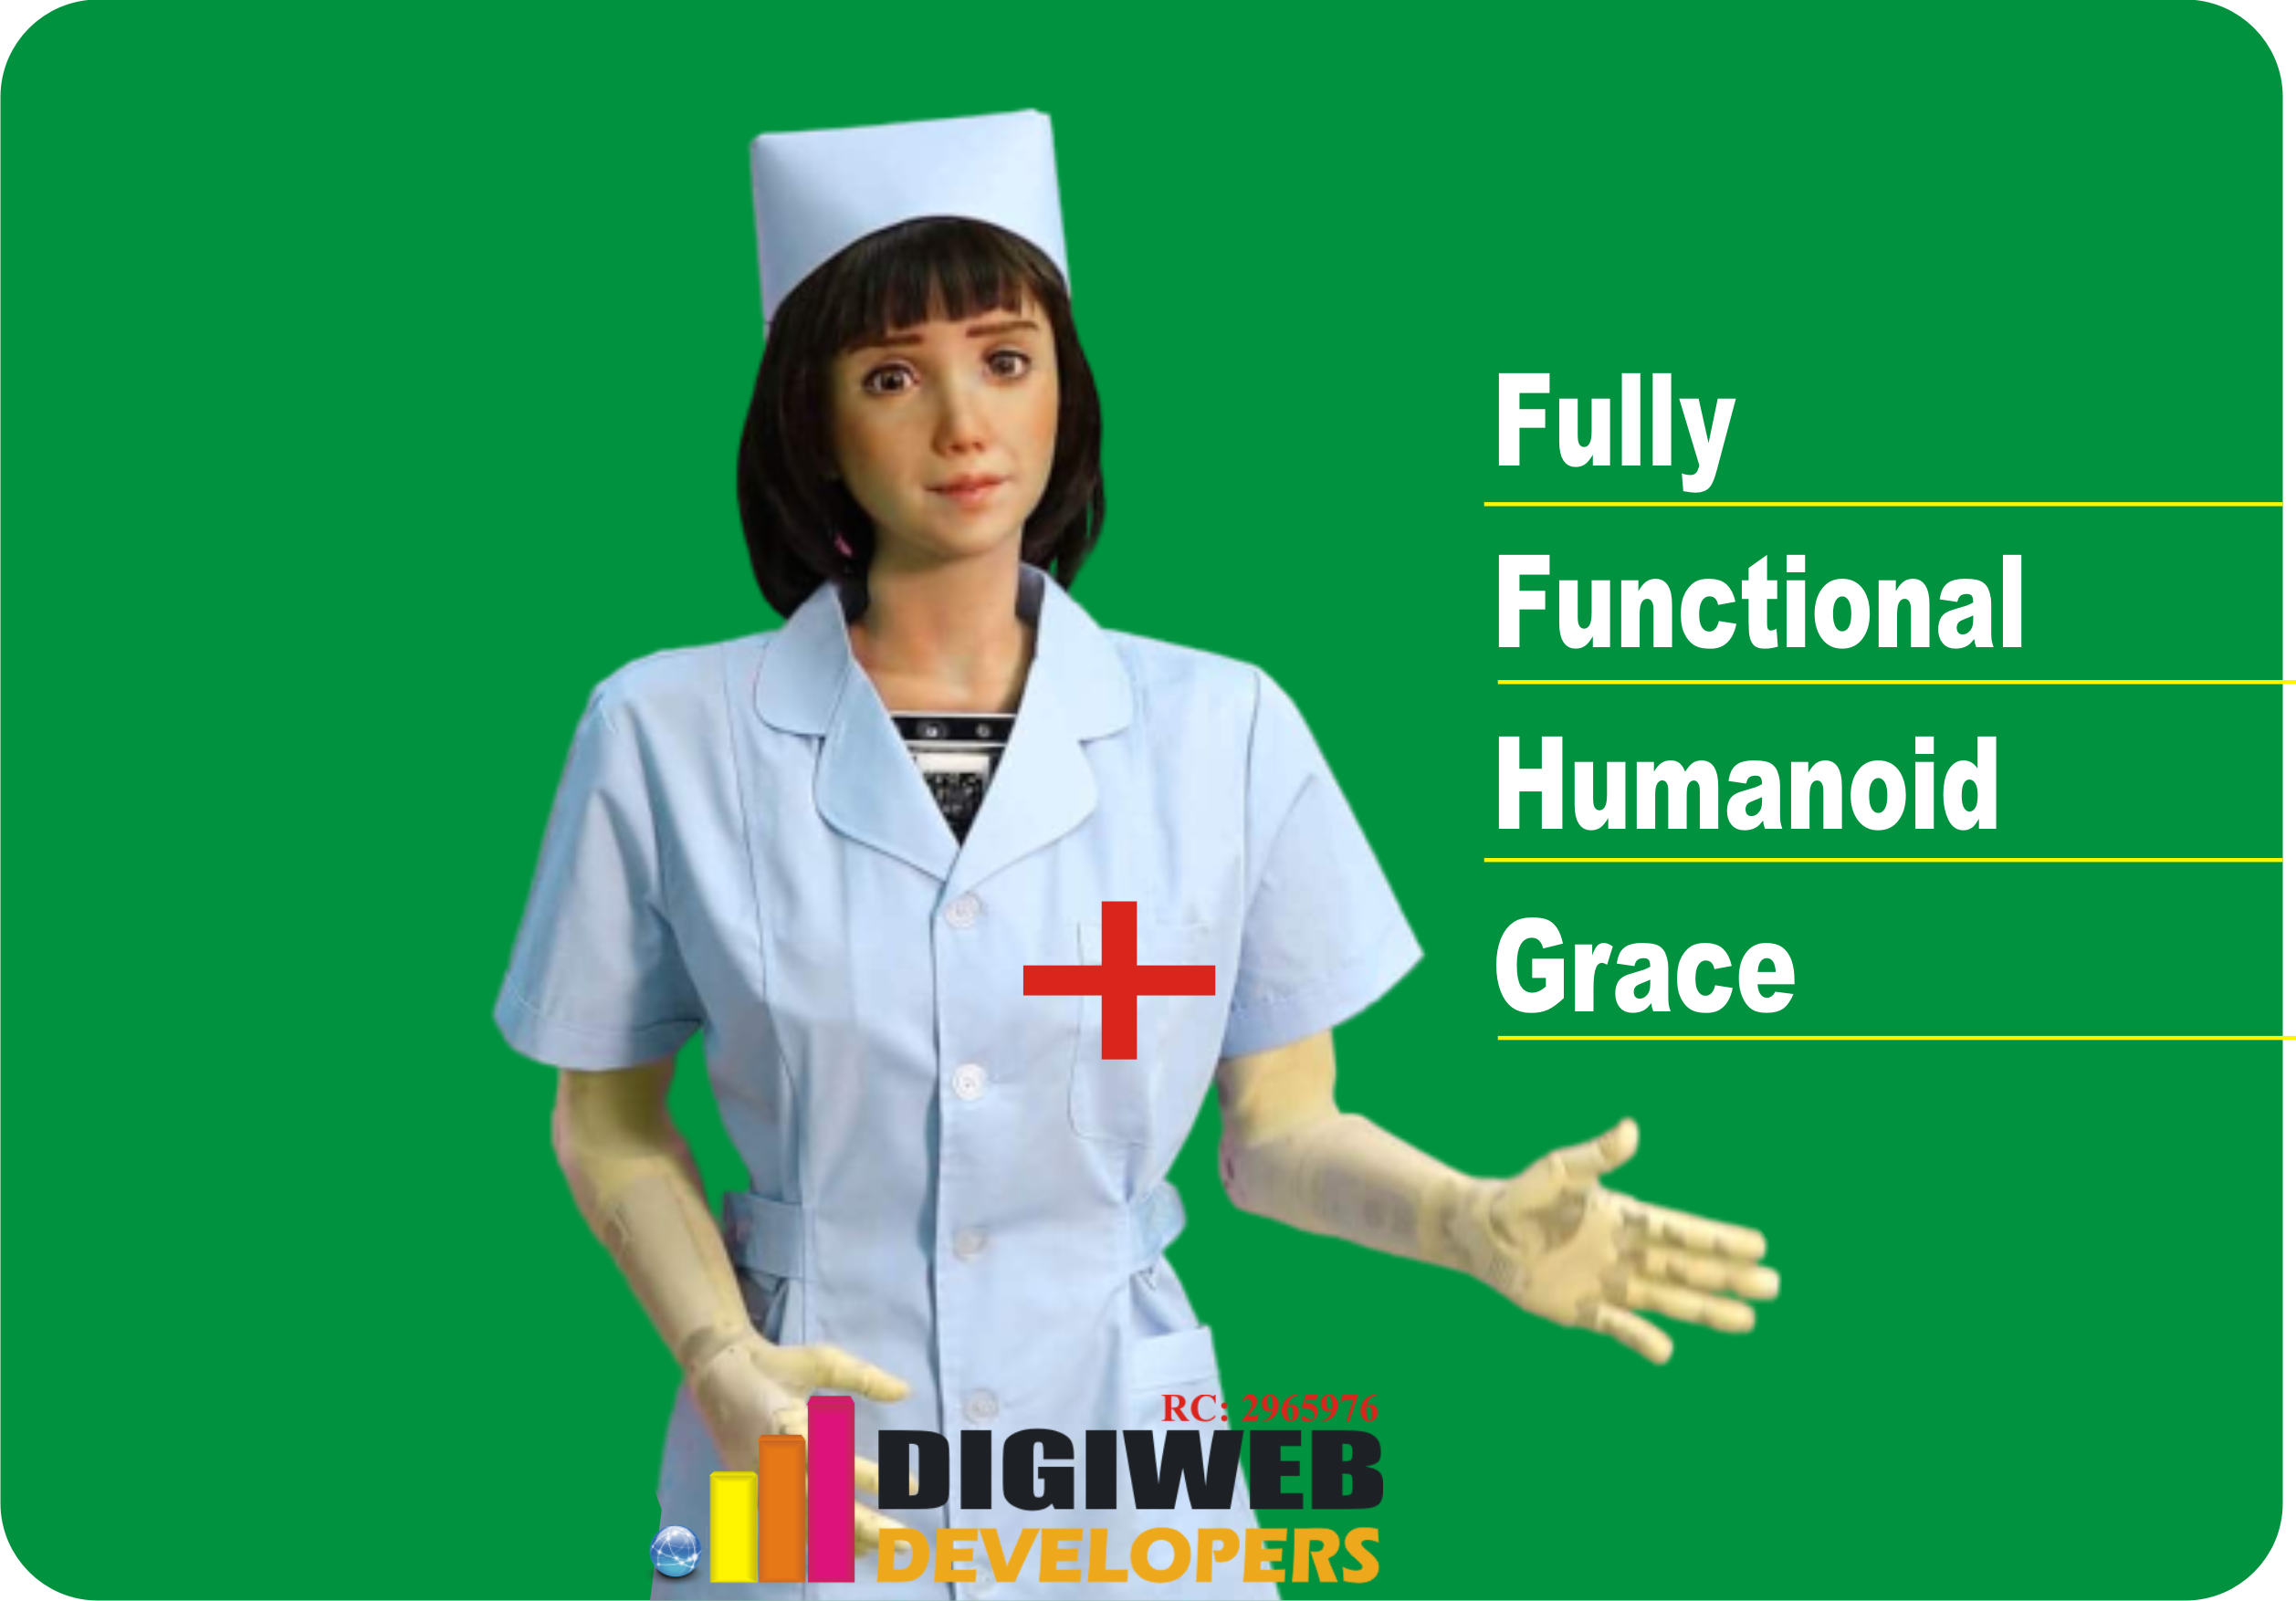 hong-kong-releases-a-fully-functional-humanoid-grace